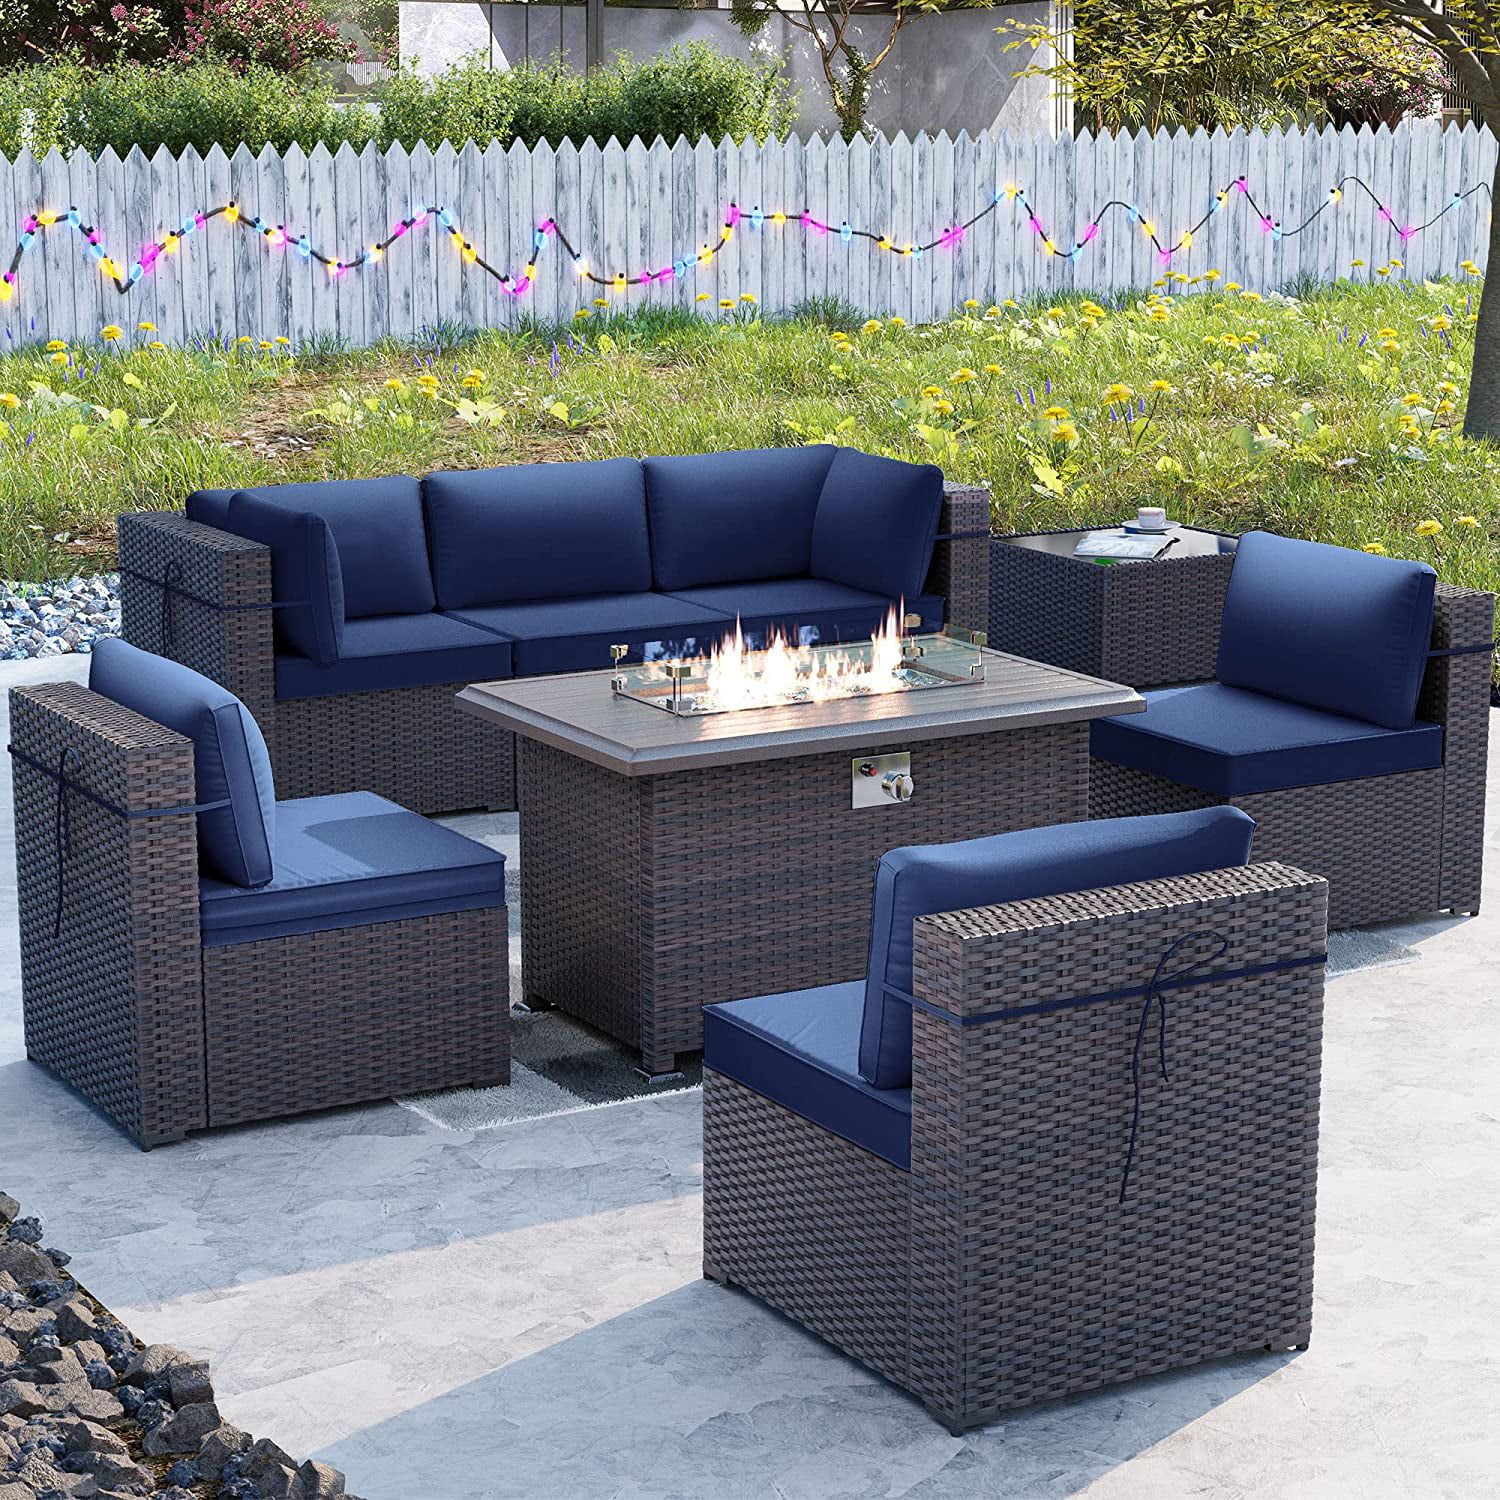 Alaulm 8 Pieces Outdoor Furniture Set With 43" Gas Propane Fire Pit Table  Pe Wicker Rattan Sectional Sofa Patio Conversation Sets,red – Walmart Within Fire Pit Table Wicker Sectional Sofa Conversation Set (View 5 of 15)